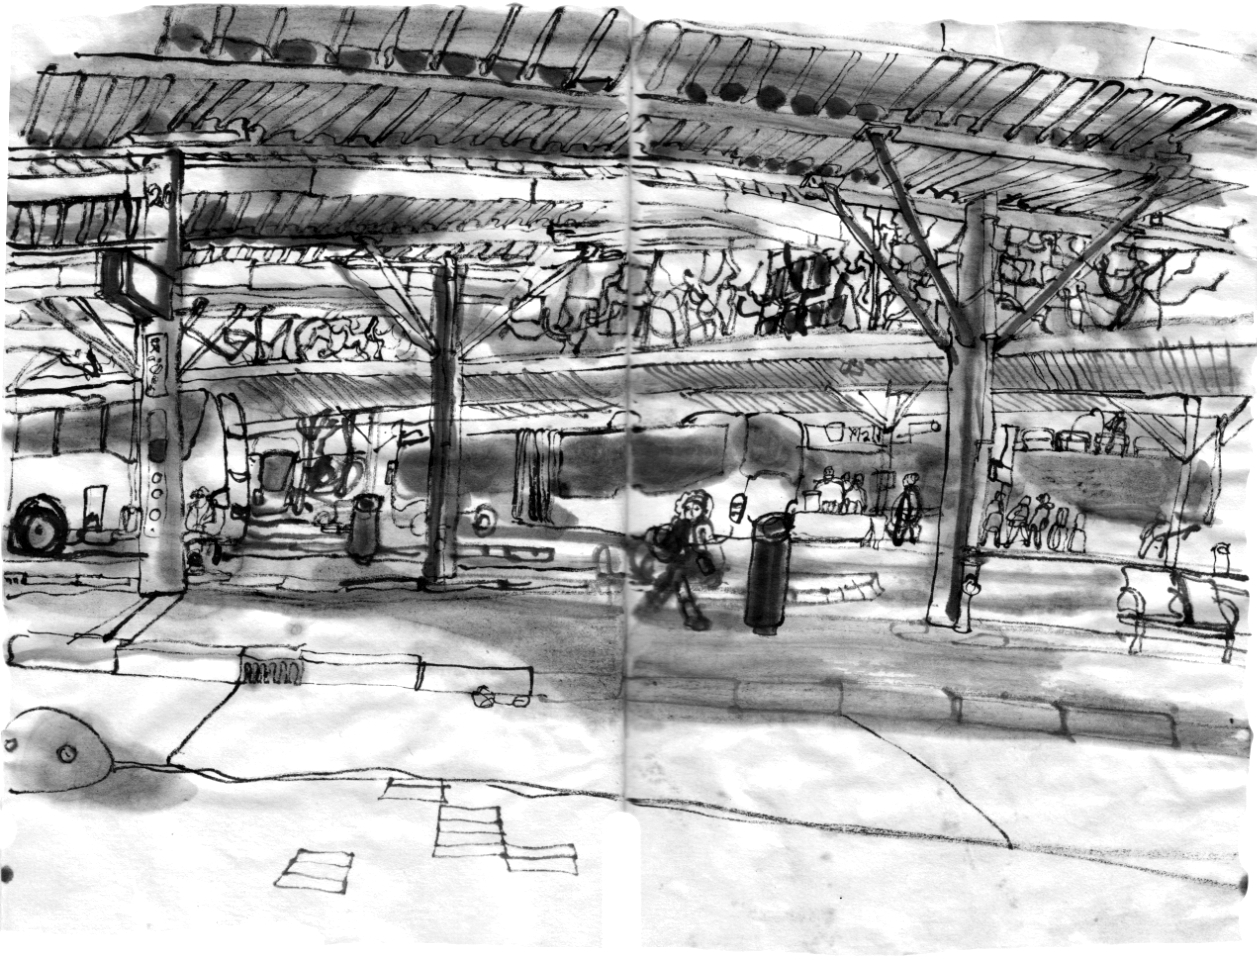 Ink drawing of a platform at a long distance bus station